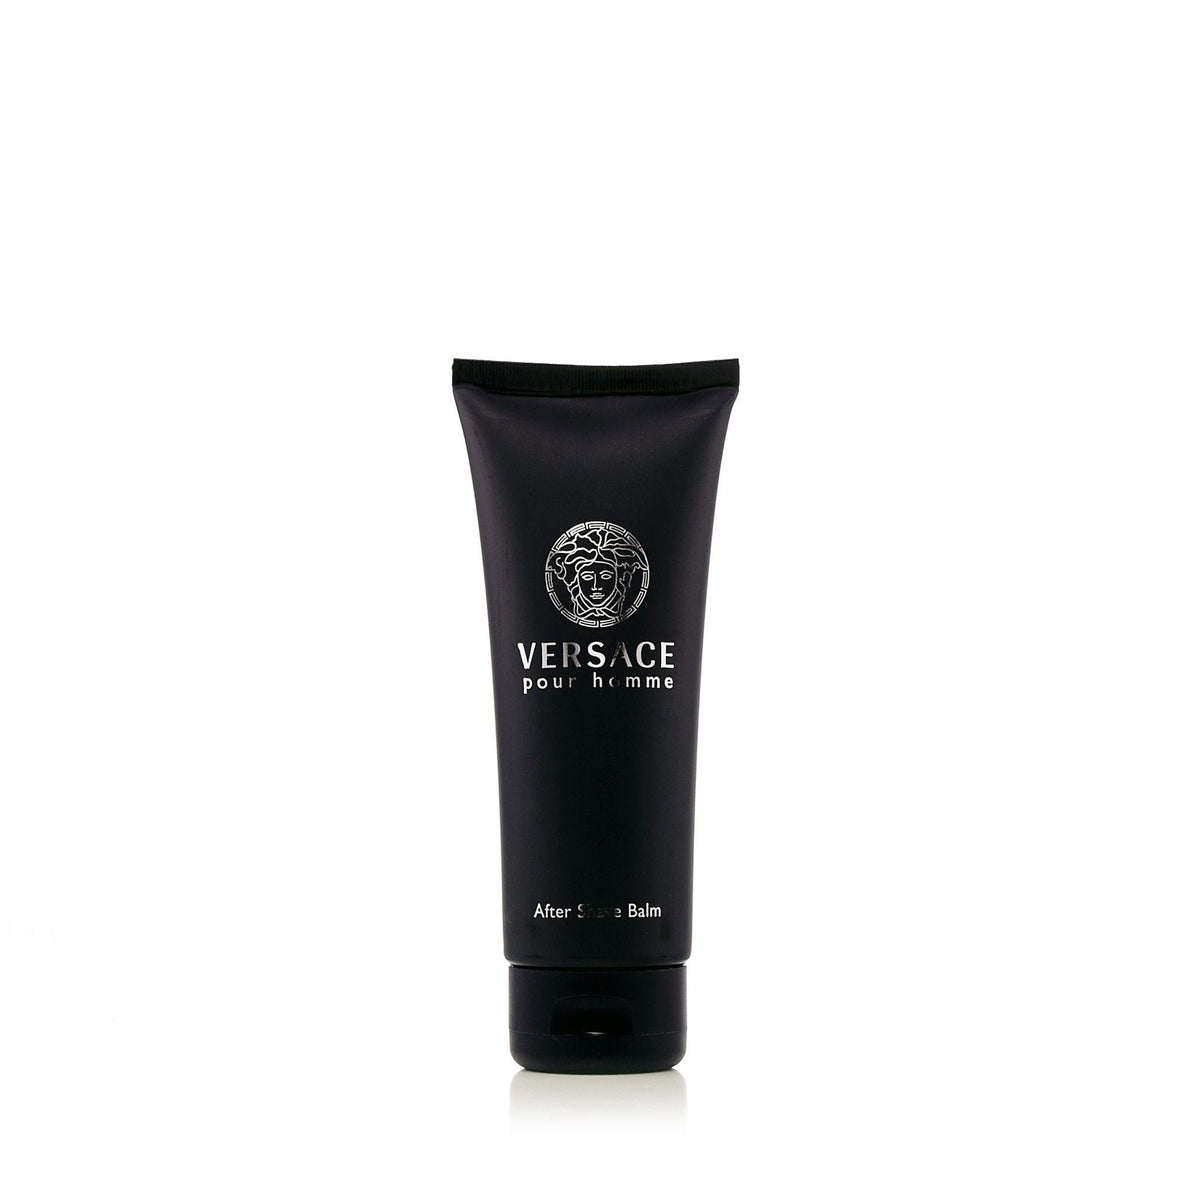 Pour Homme After Shave Balm for Men by Versace 3.4 oz.